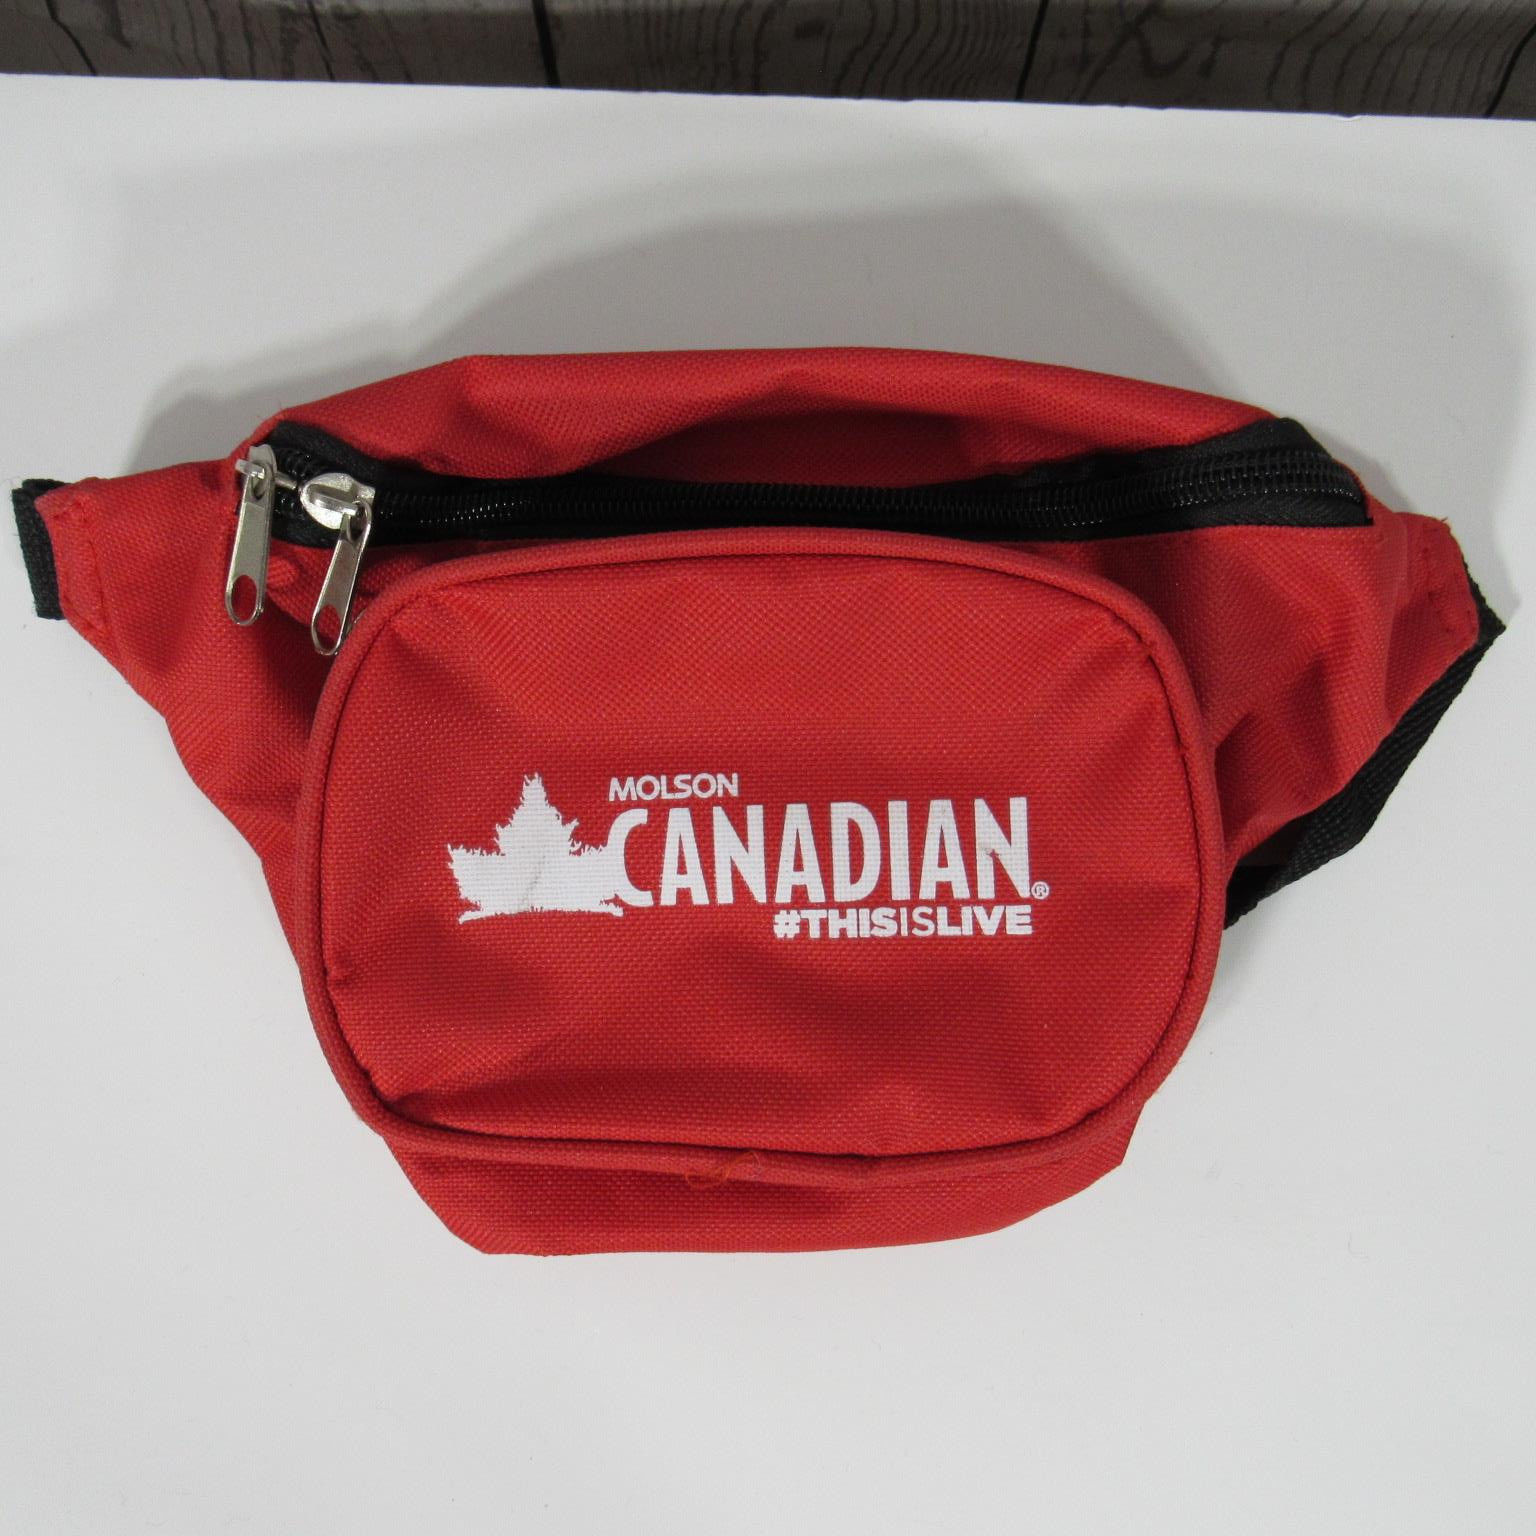 Molson Canadian Pouch Fanny Pack Beer Canada Red - Backpacks, Bags & Briefcases